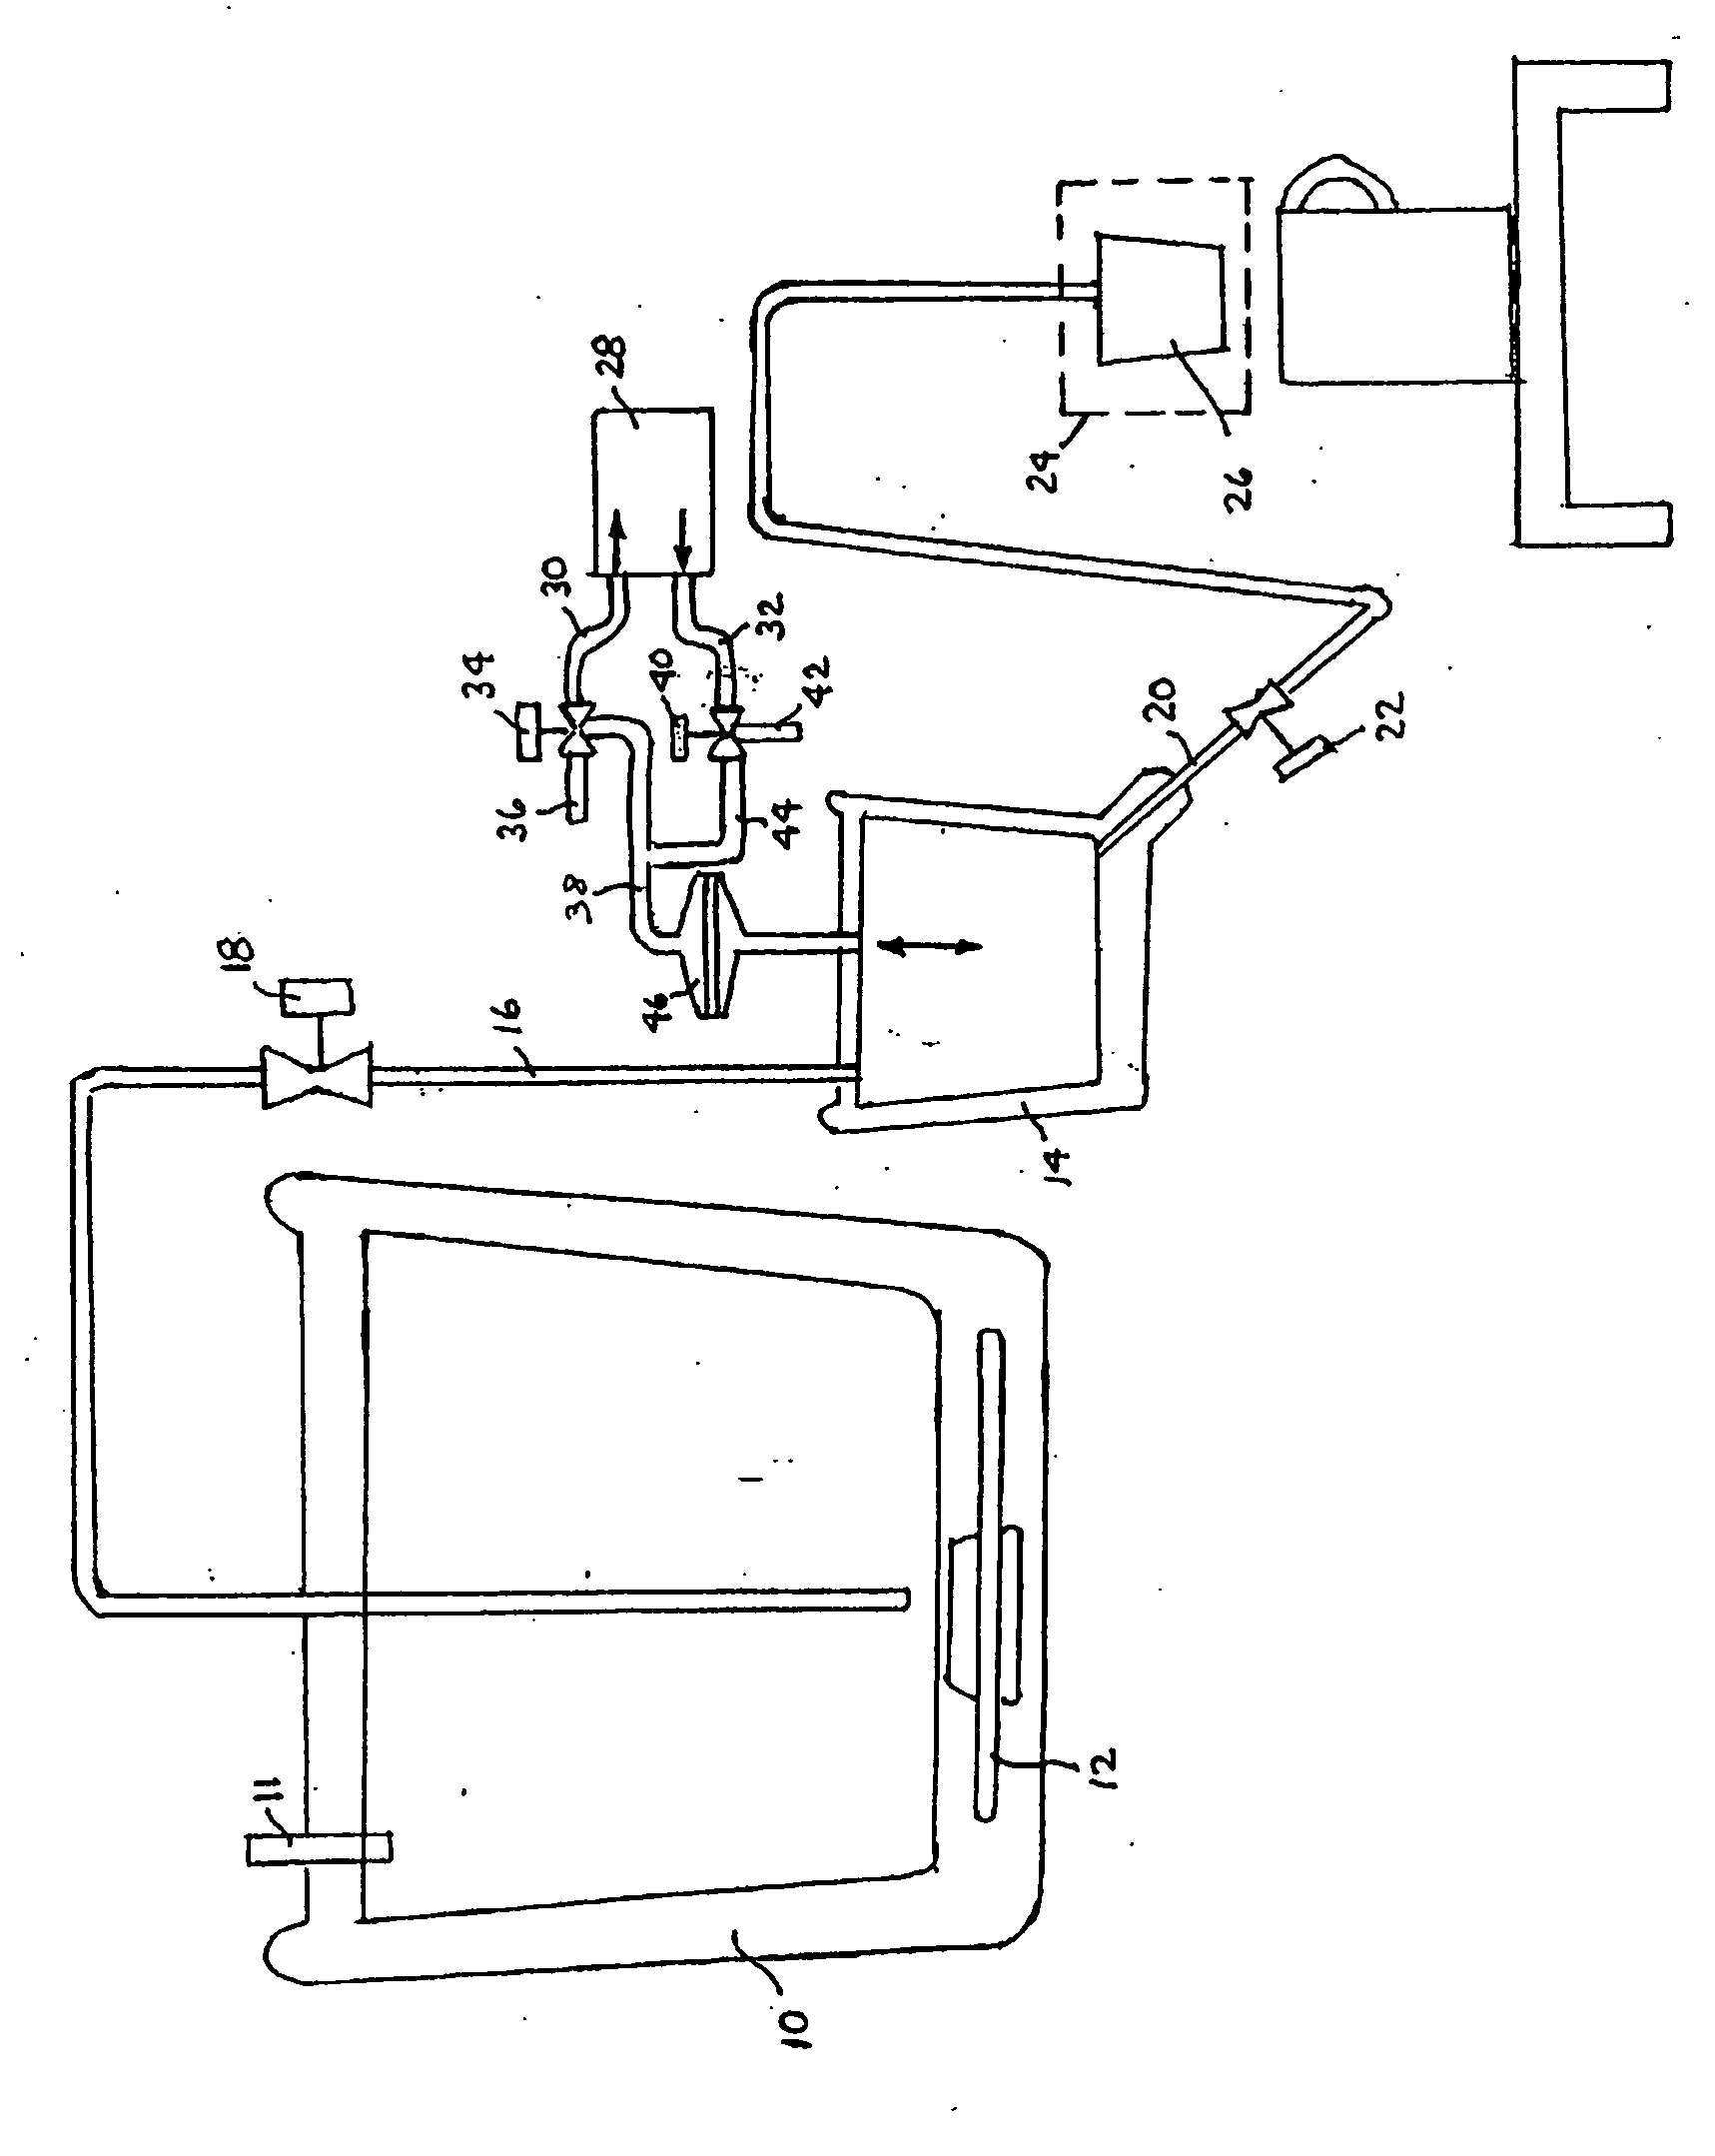 Dispensing system with vacuum-filled metering chamber